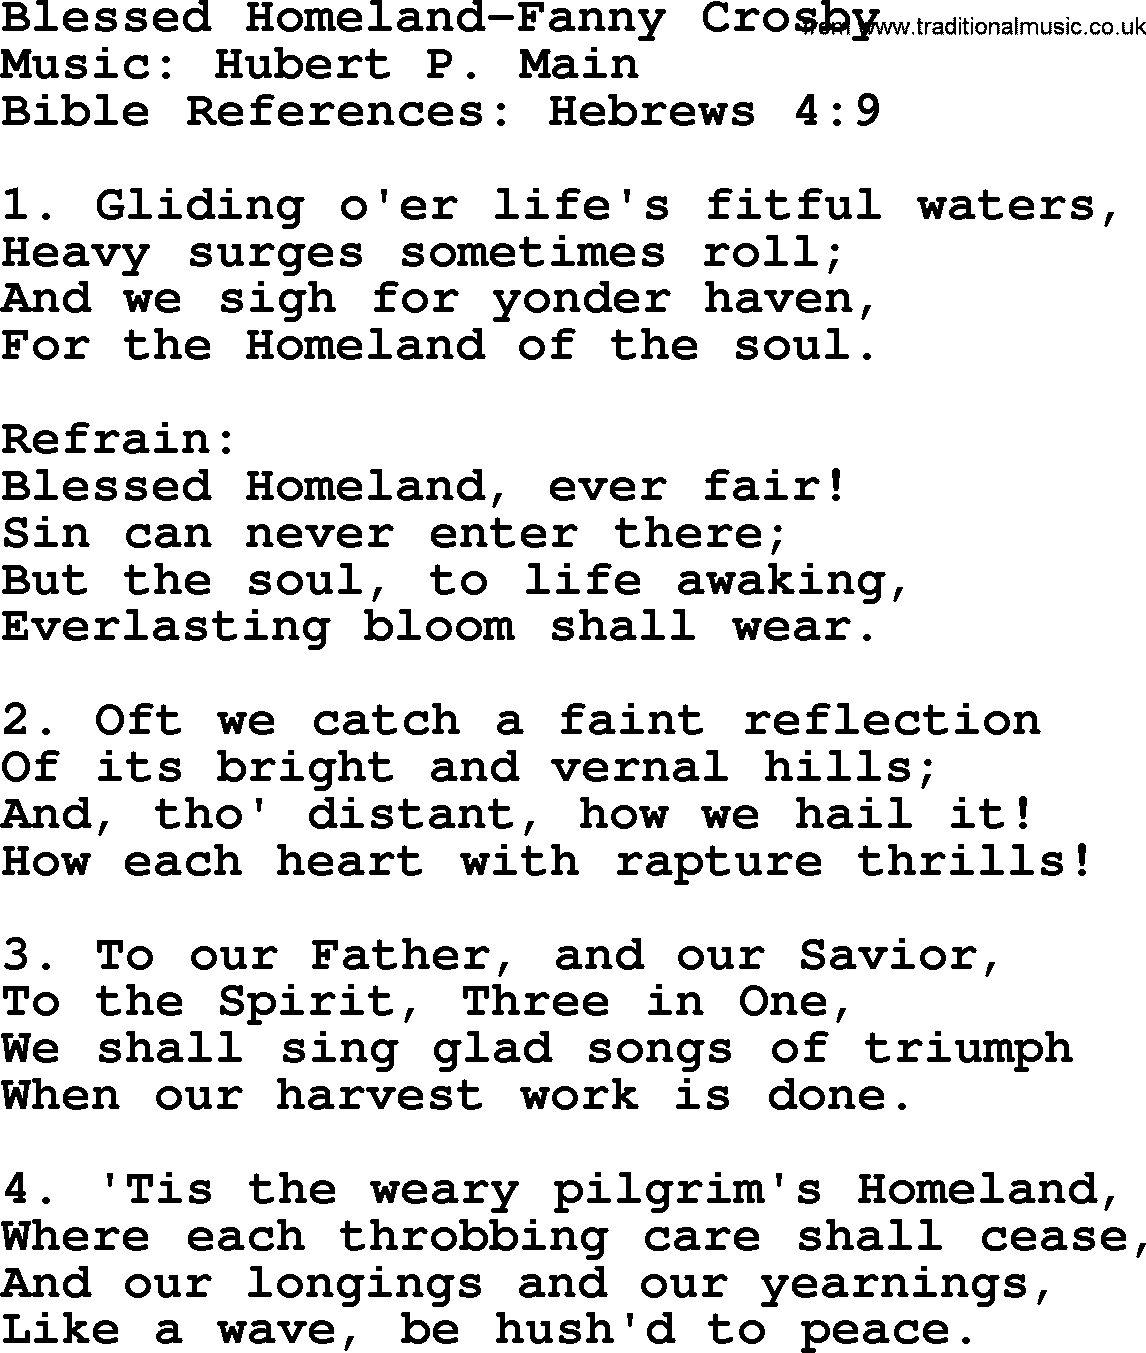 Hymns from the Psalms, Hymn: Blessed Homeland-Fanny Crosby, lyrics with PDF